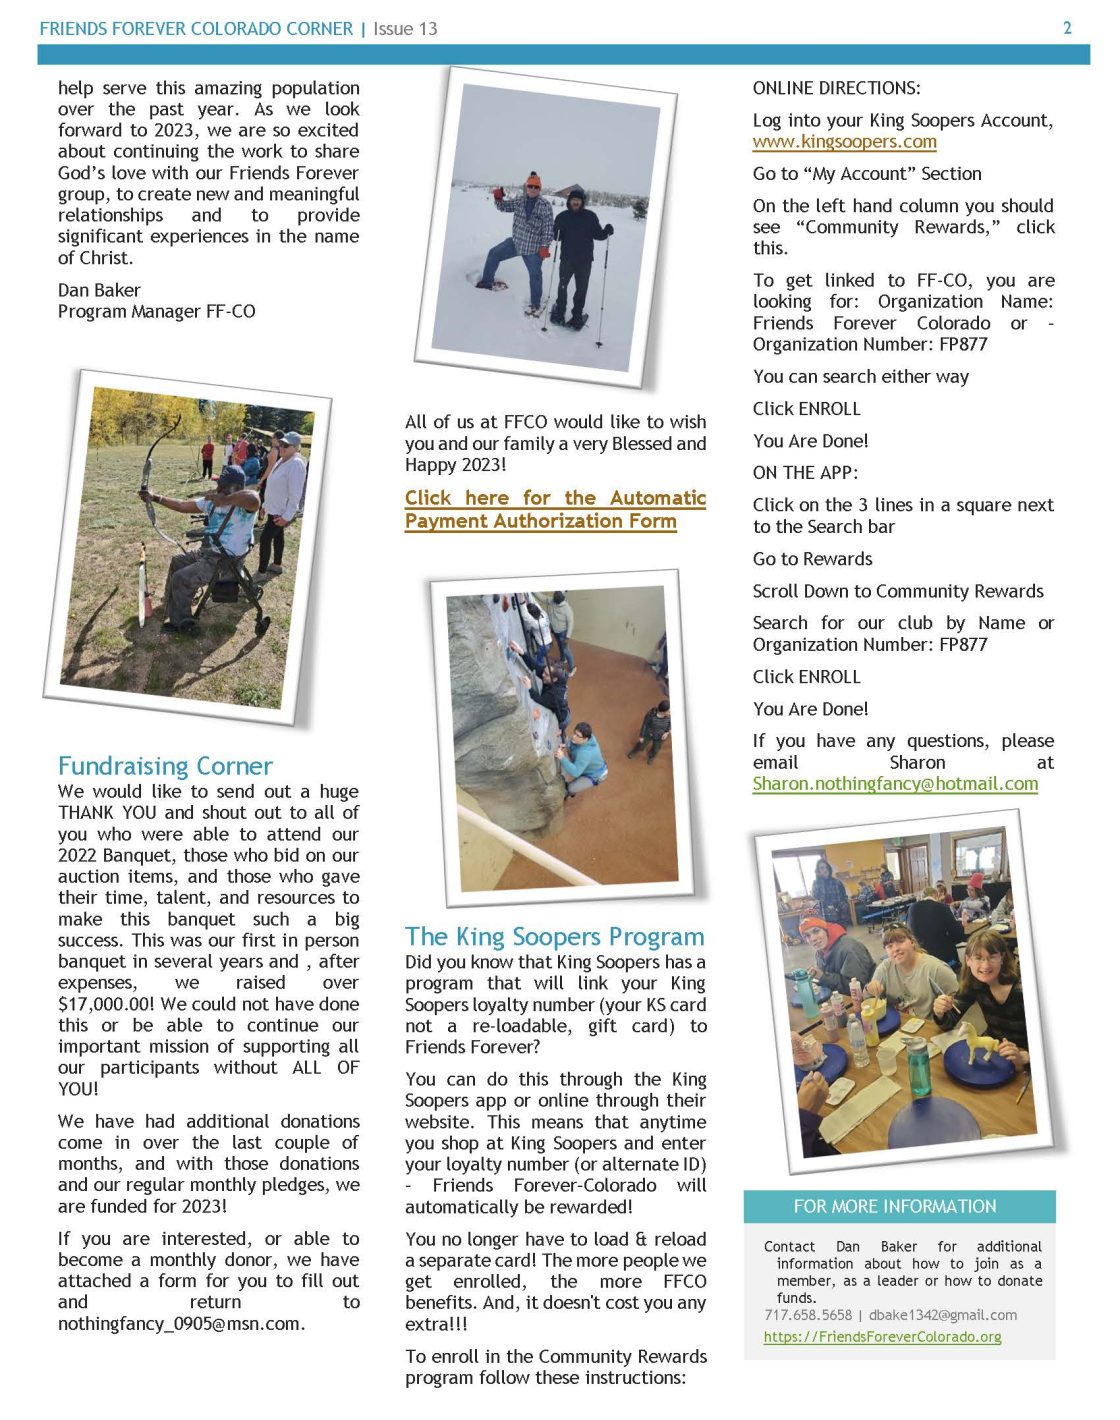 Newsletter page 2 Winter 2022